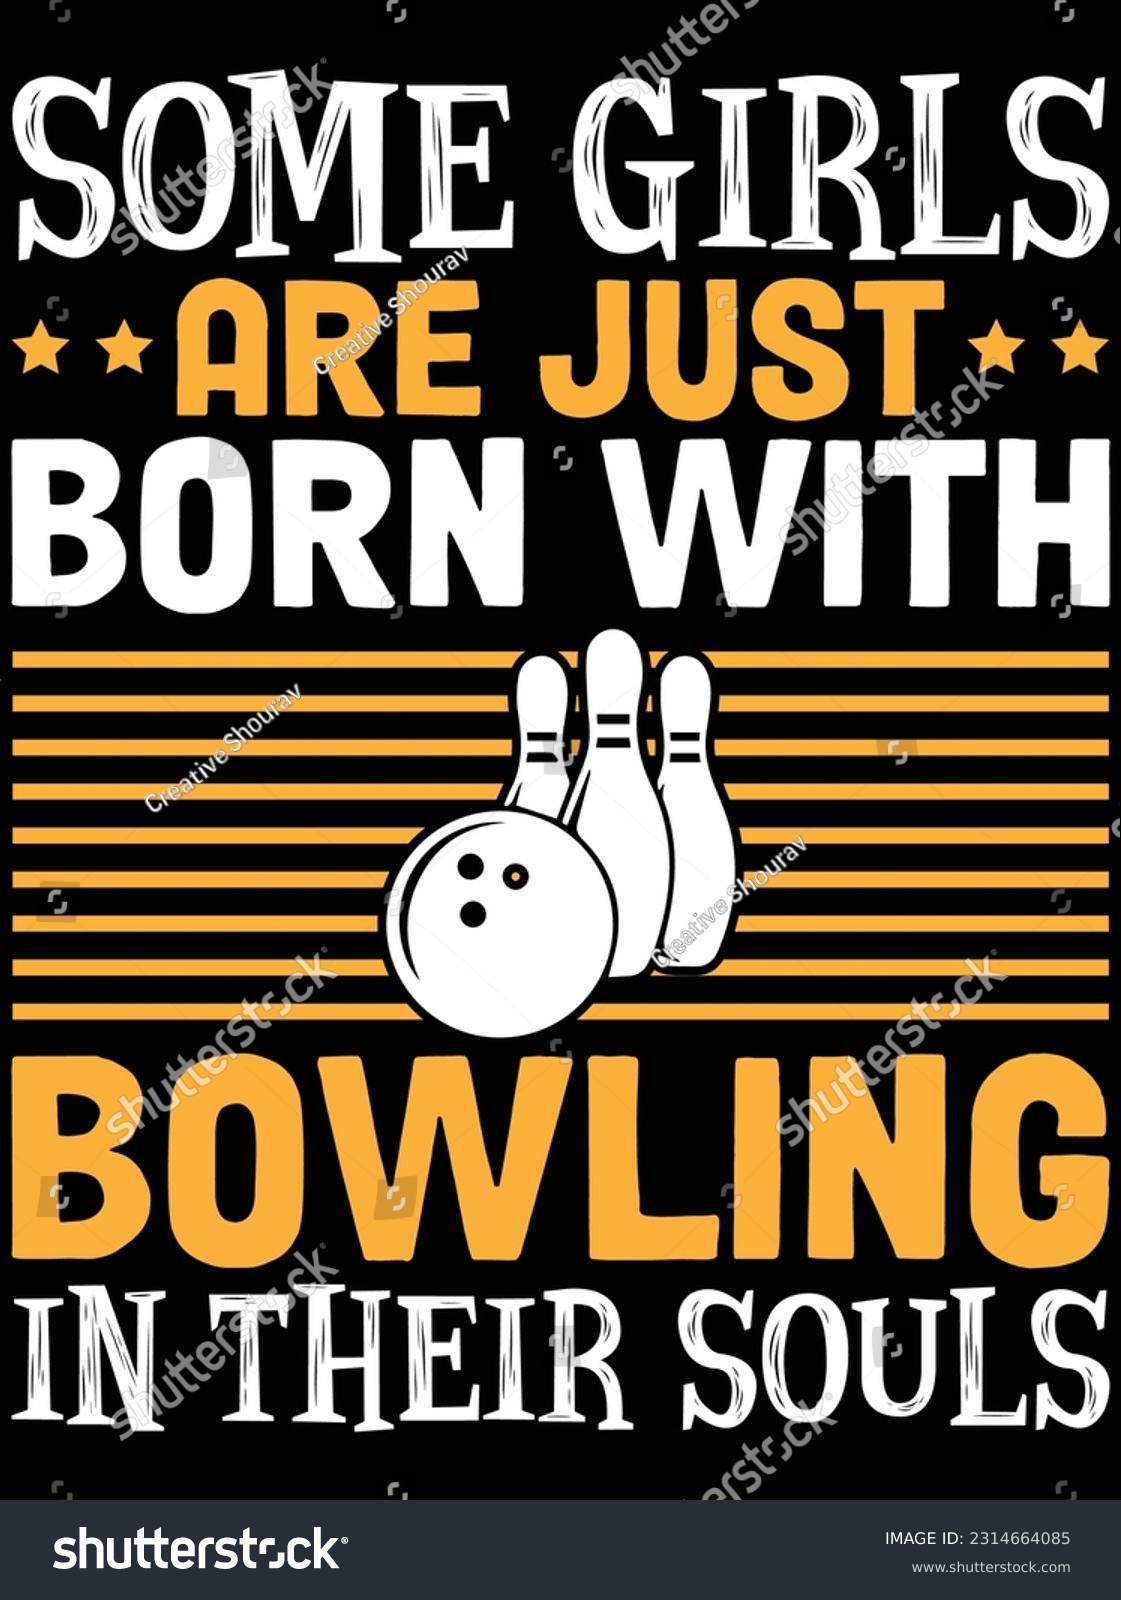 SVG of Some girls are just born with bowling vector art design, eps file. design file for t-shirt. SVG, EPS cuttable design file svg